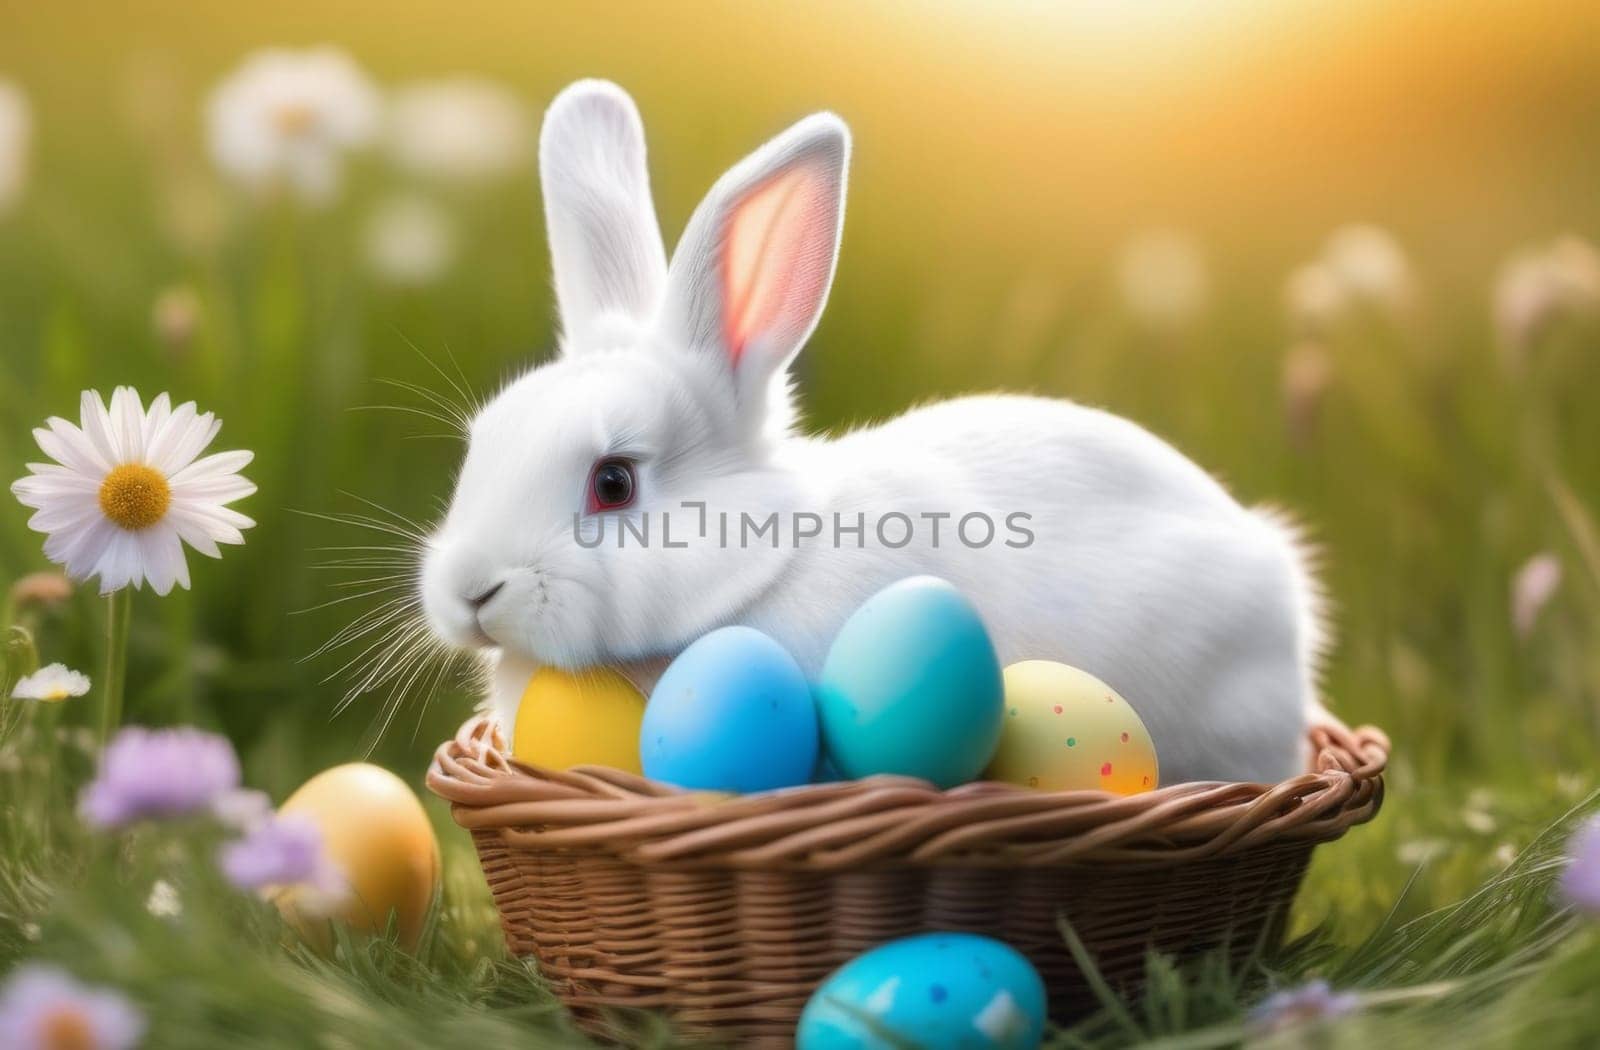 White rabbit in a basket with colored eggs in a field with daisies for Easter by Godi